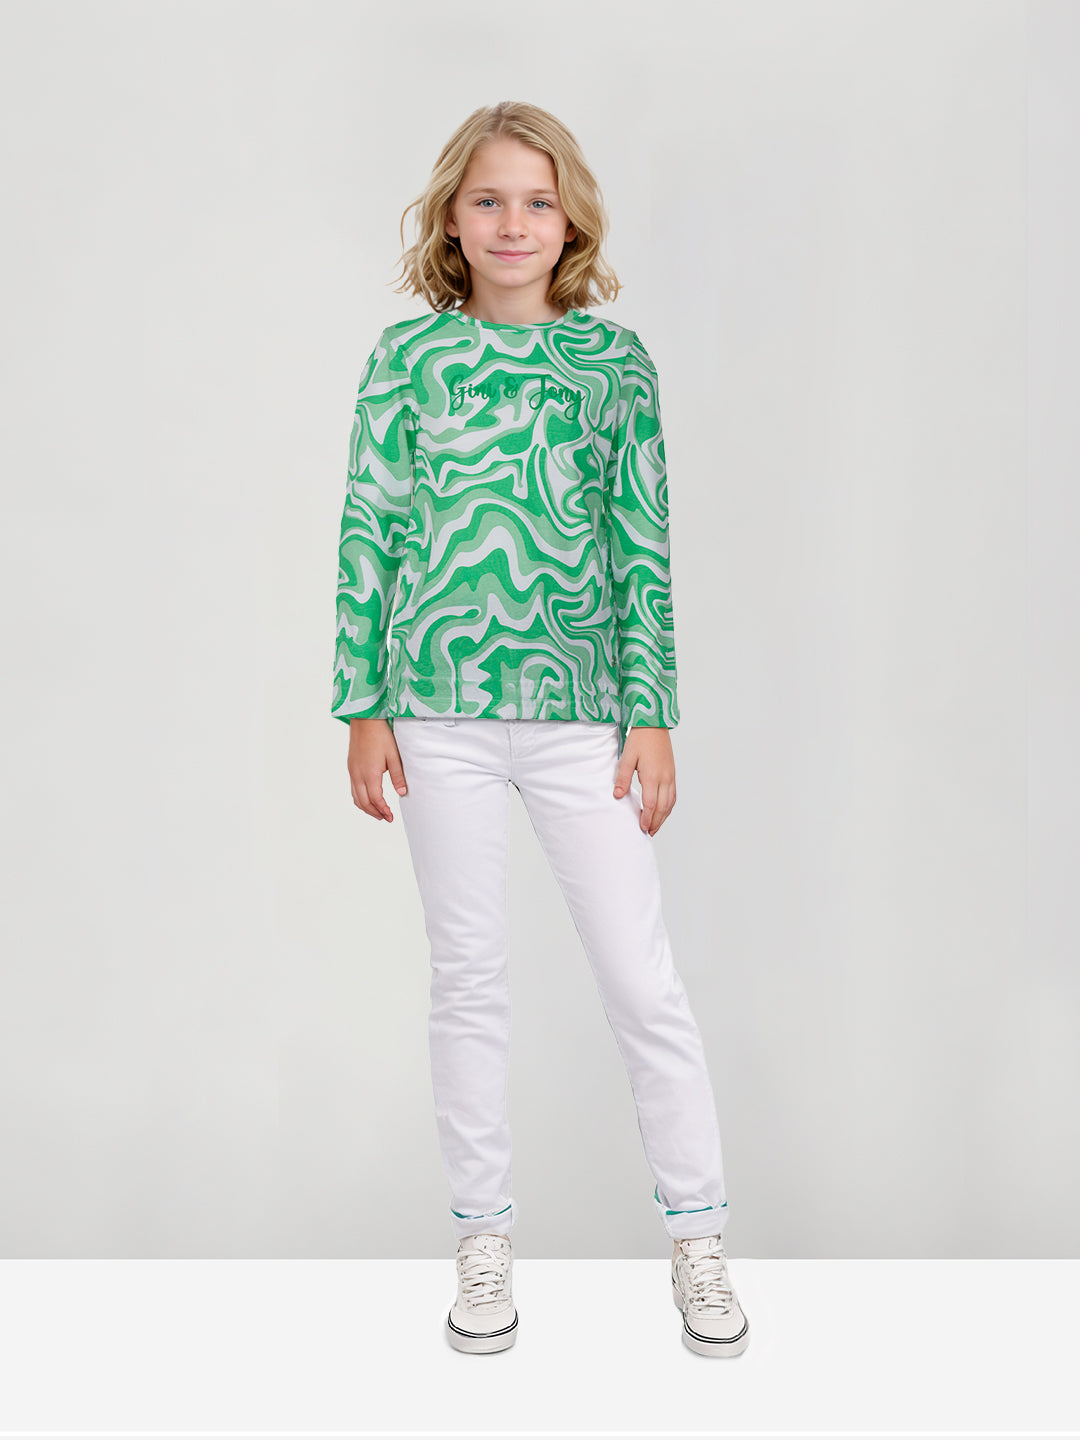 Girls Green Printed Cotton Full Sleeves Knits Top